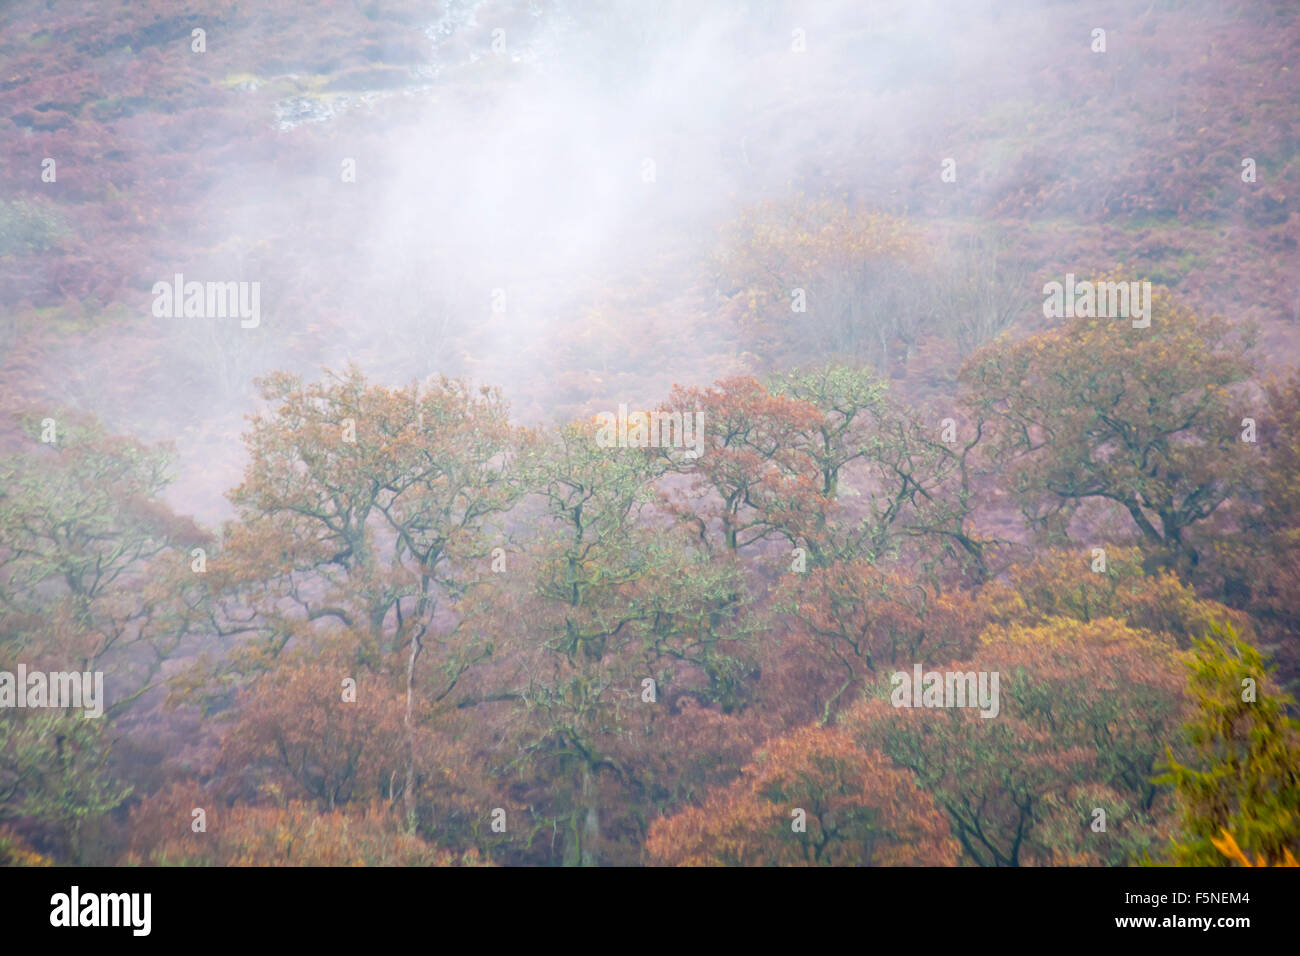 Mist rising from trees in Autumn colours at Elan village in Elan Valley, Powys, Mid Wales, UK in November Stock Photo